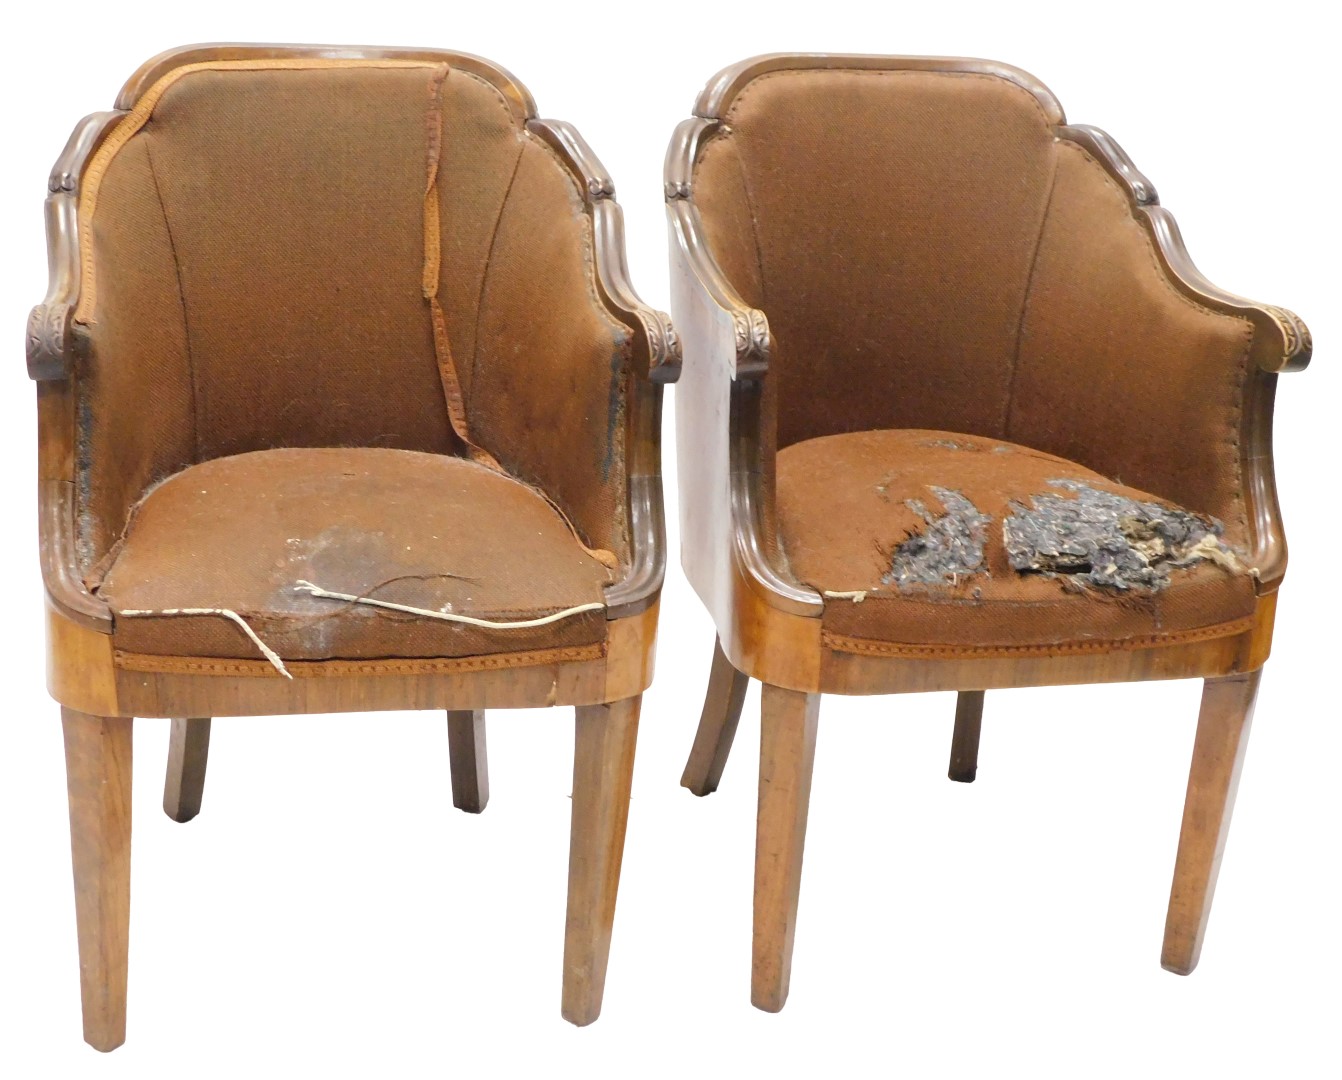 A pair of Continental Biedermeier style walnut tub chairs, each with a moulded show frame, a veneere